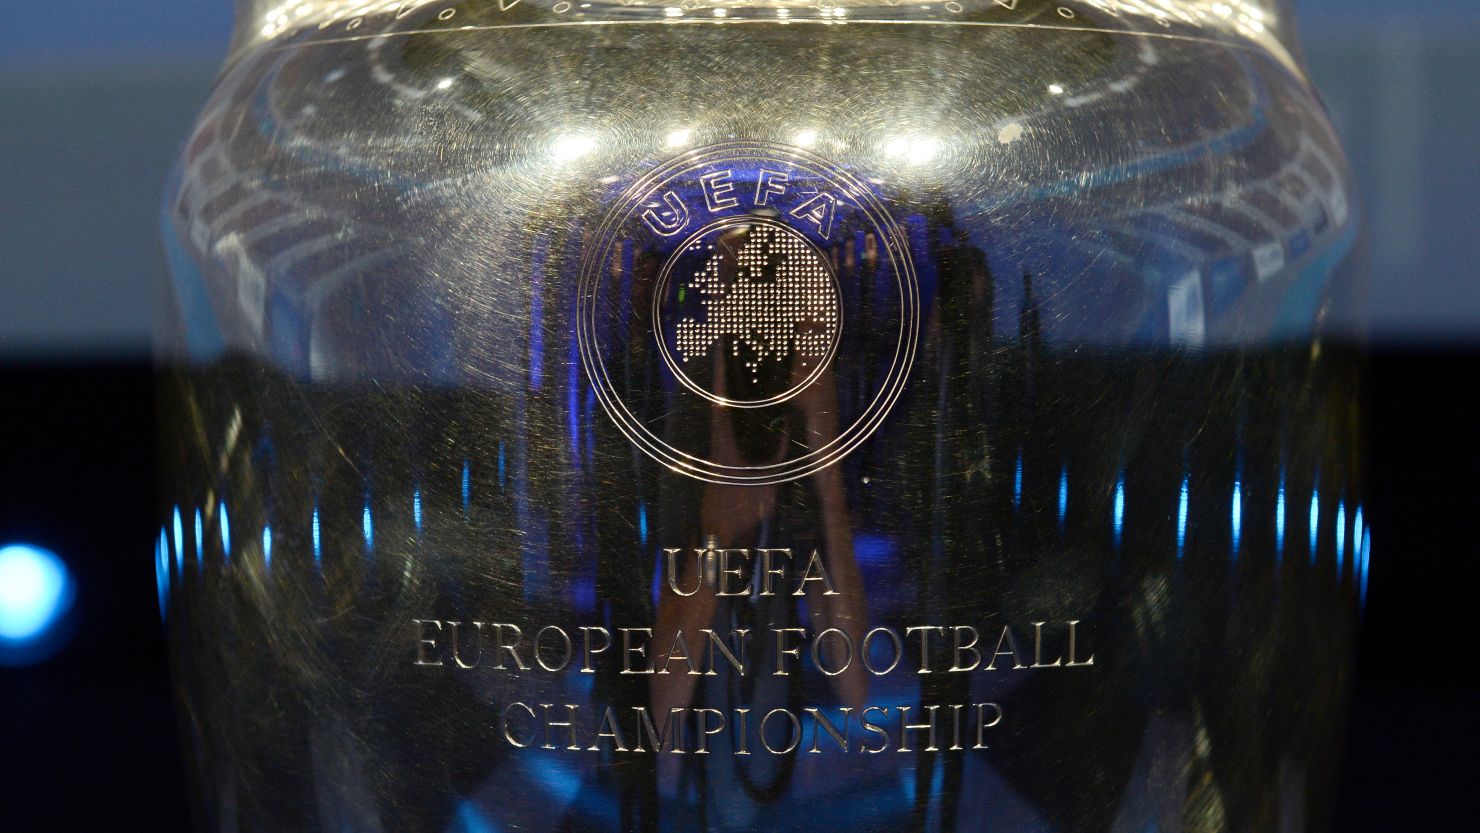 The Coupe Henri Delaunay -- the trophy of the UEFA European Football Championship.